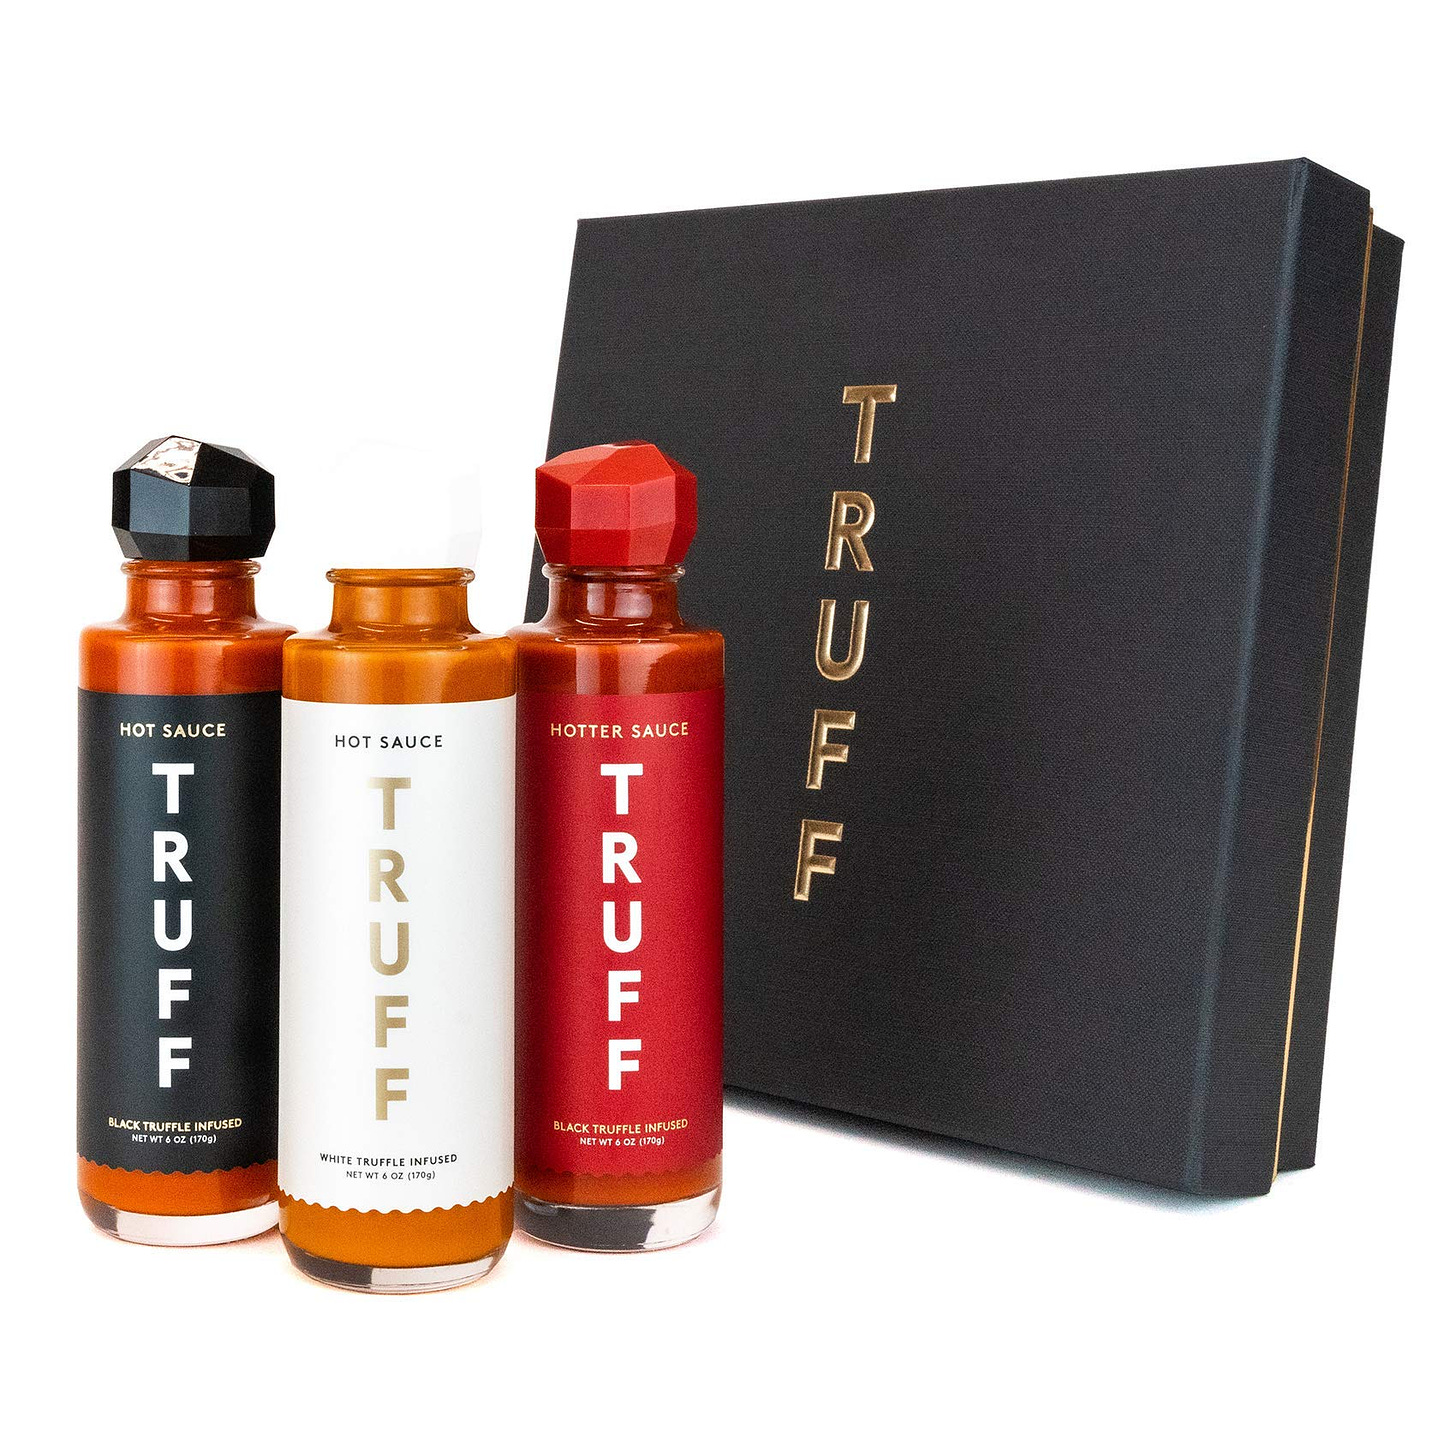 Amazon.com : TRUFF Hot Sauce Variety Pack, Gourmet Hot Sauce Set of  Original, Hotter and Limited White Edition, Unique Flavor Experiences with  Truffle, 3-Bottle Bundle, 3ct 6oz bottles : Grocery & Gourmet